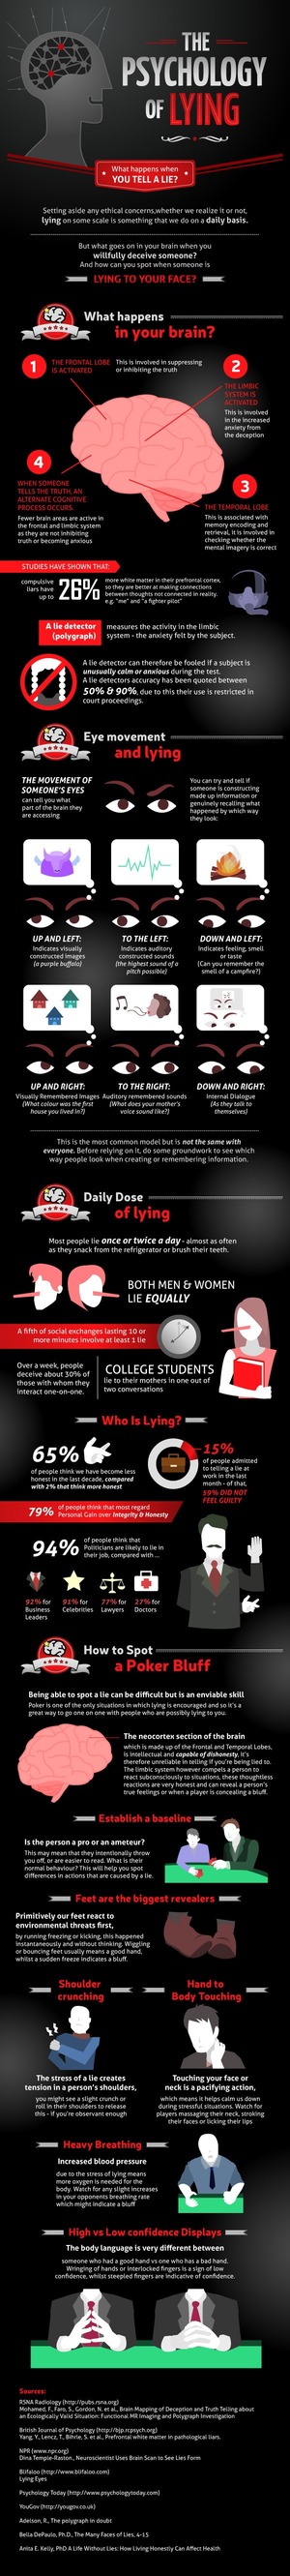 The-Psychology-of-Lying